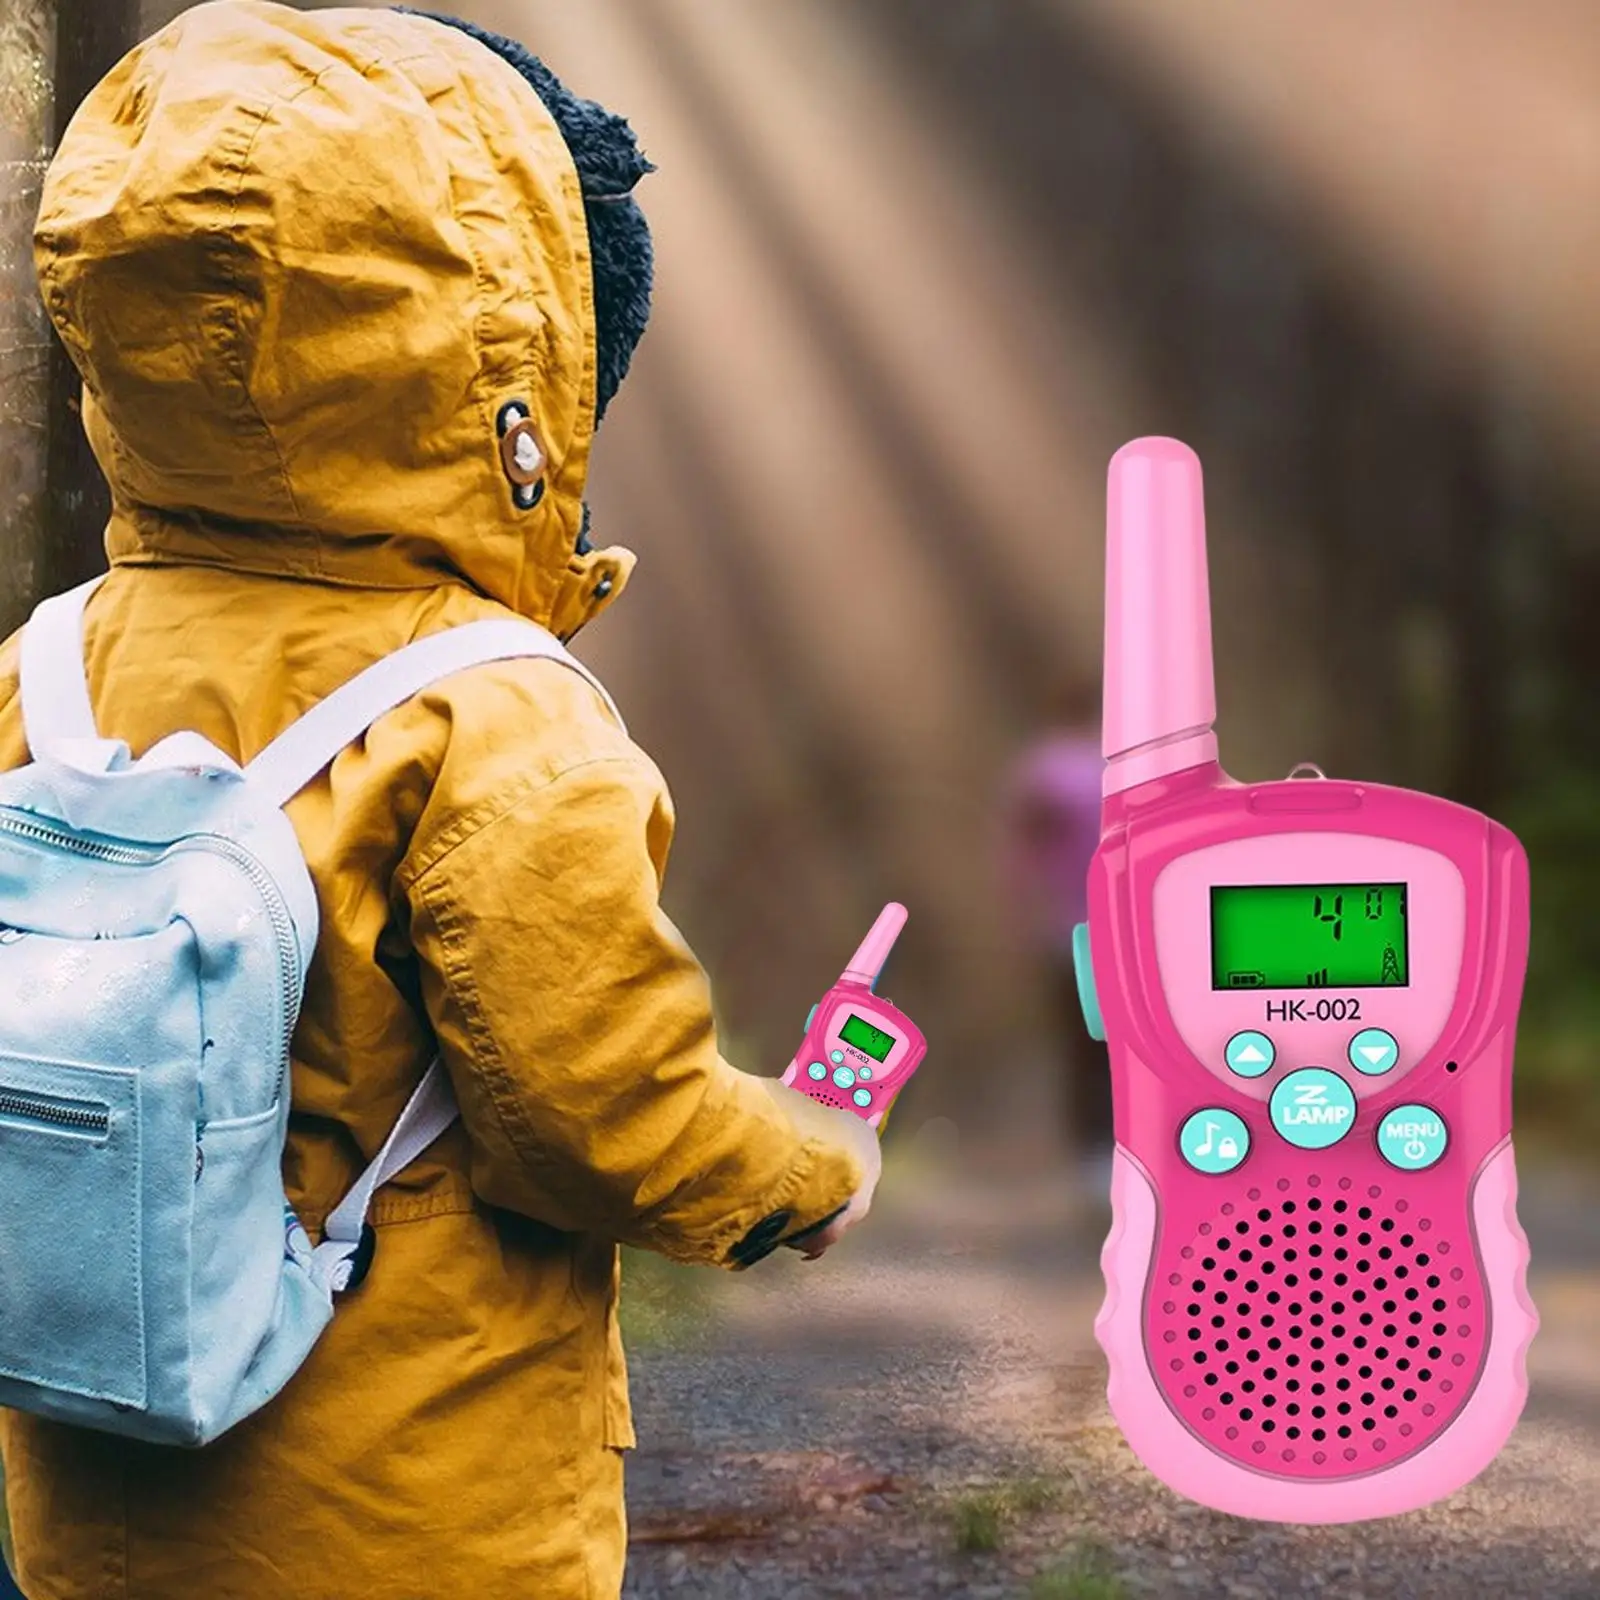 2x Children Walkie Talkie Outdoor Toy for 3-12 Years Old Boys Girls Camping